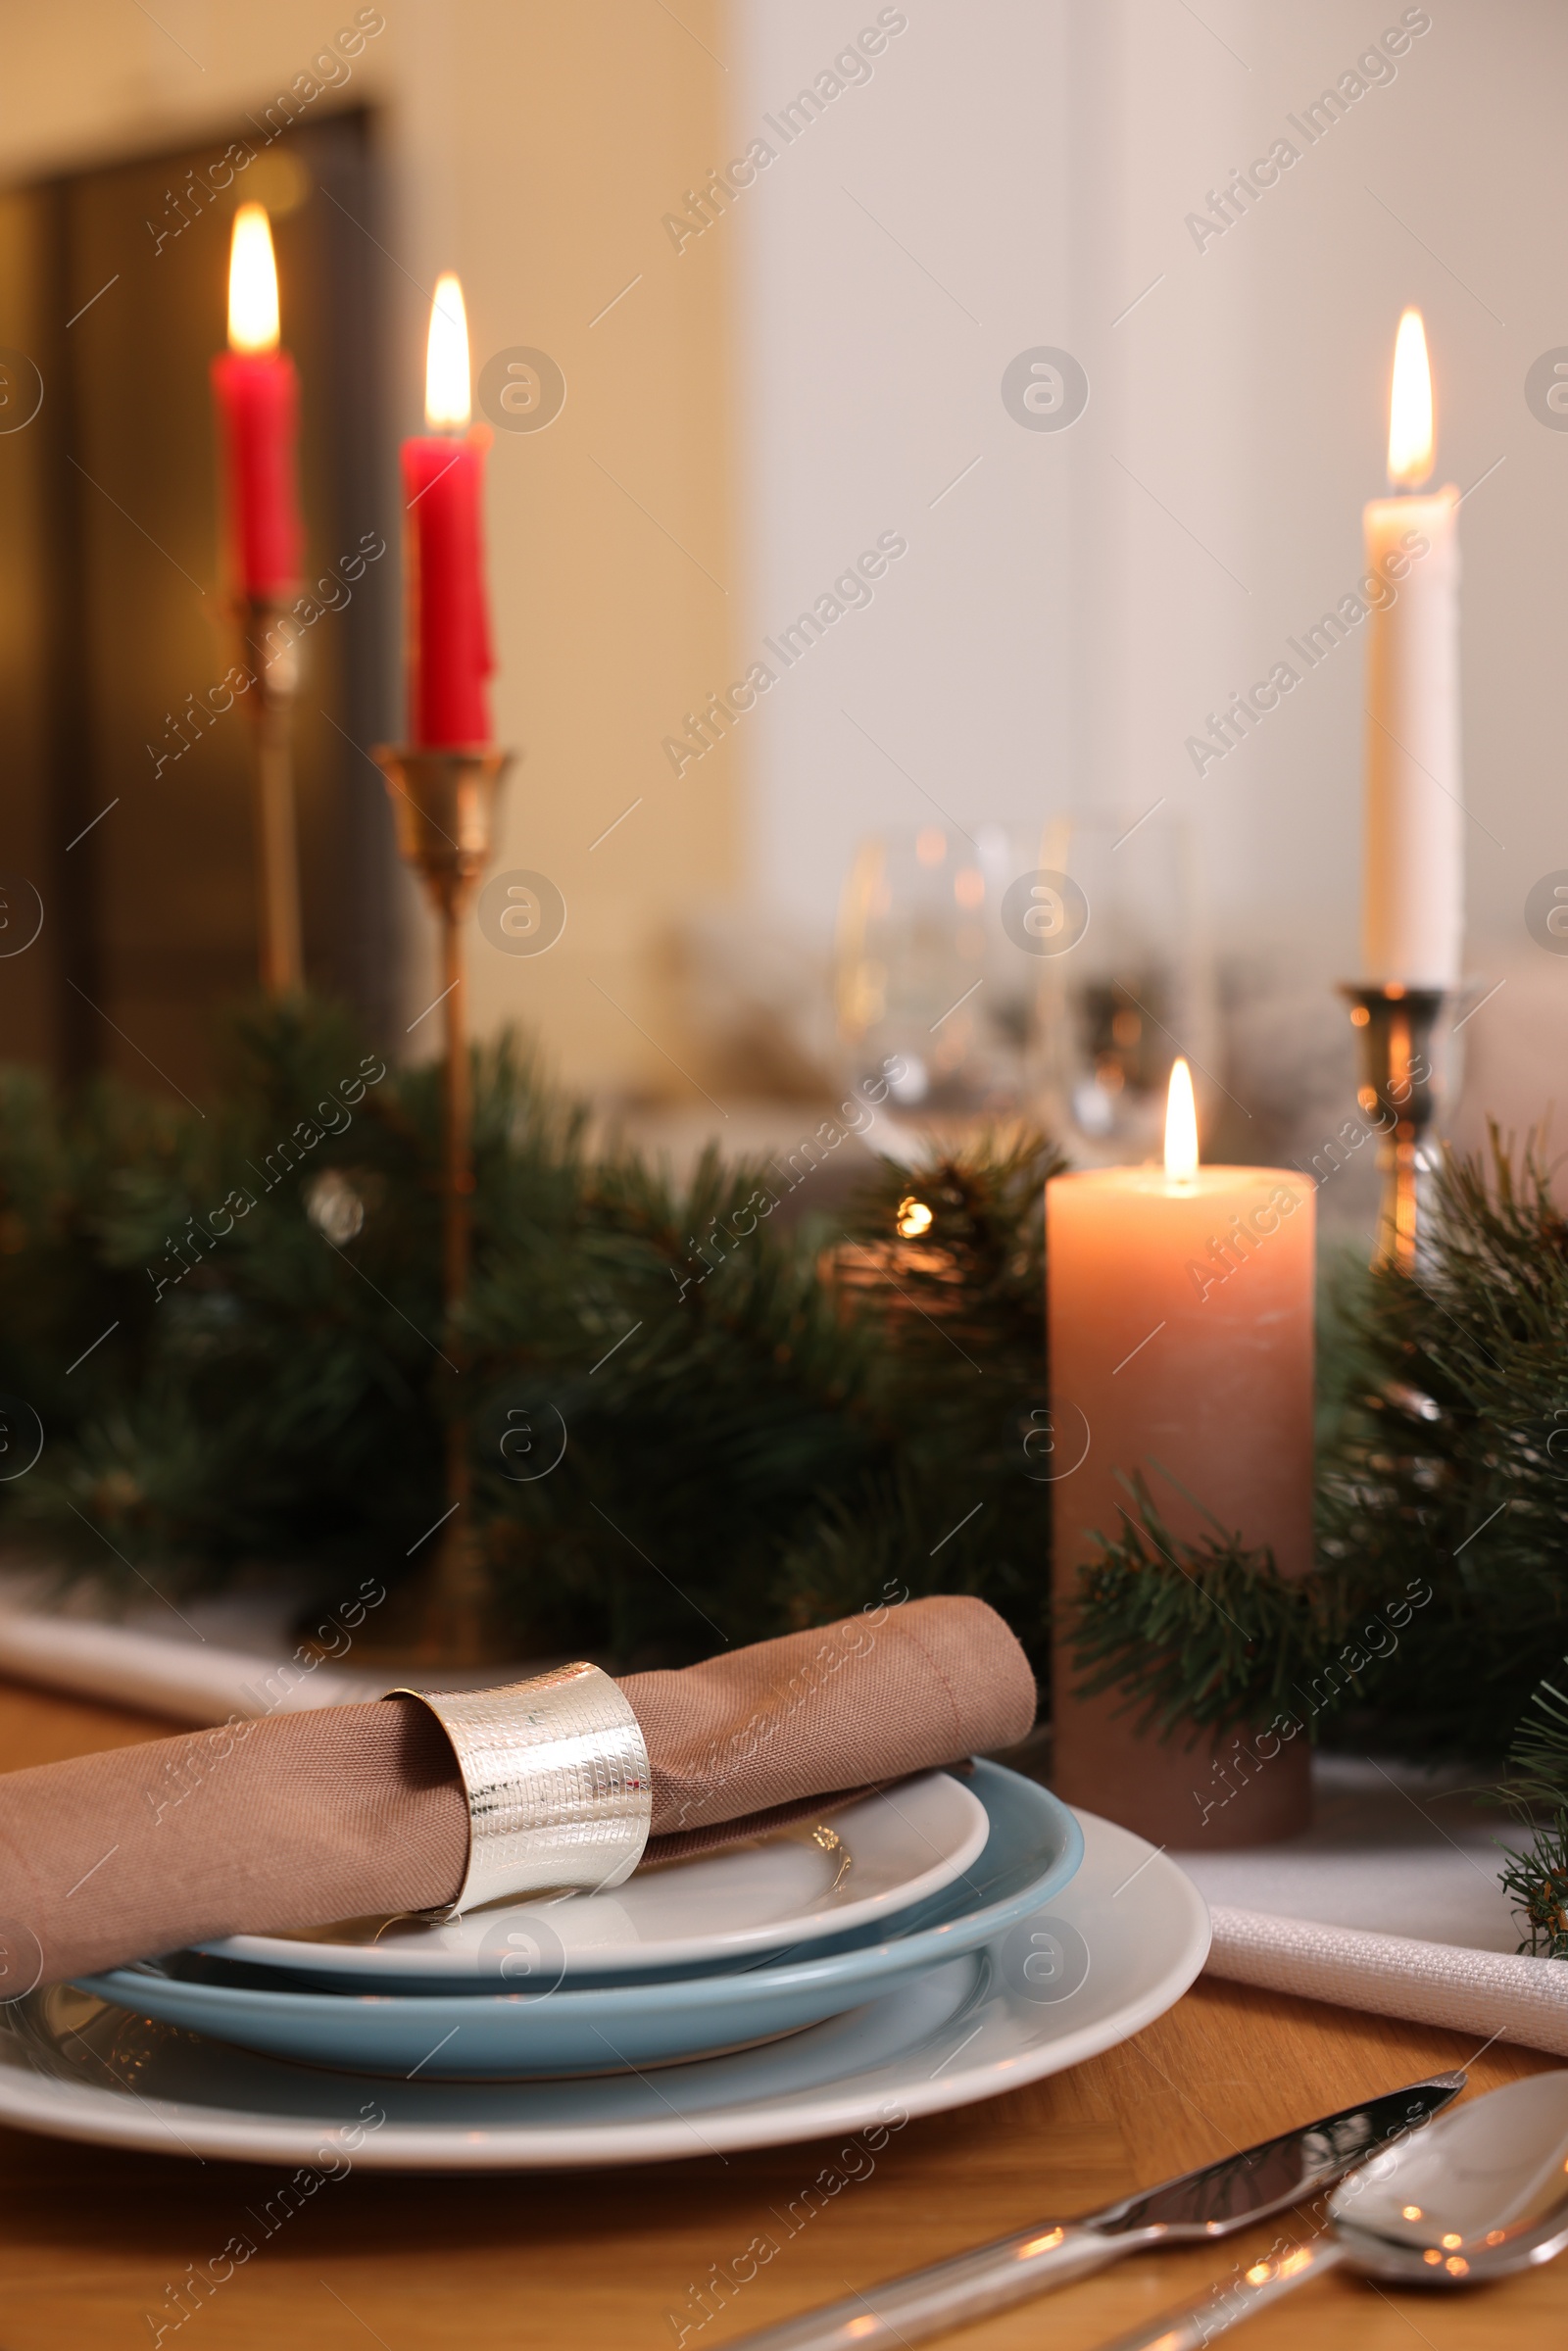 Photo of Luxury place setting with beautiful festive decor for Christmas dinner on wooden table